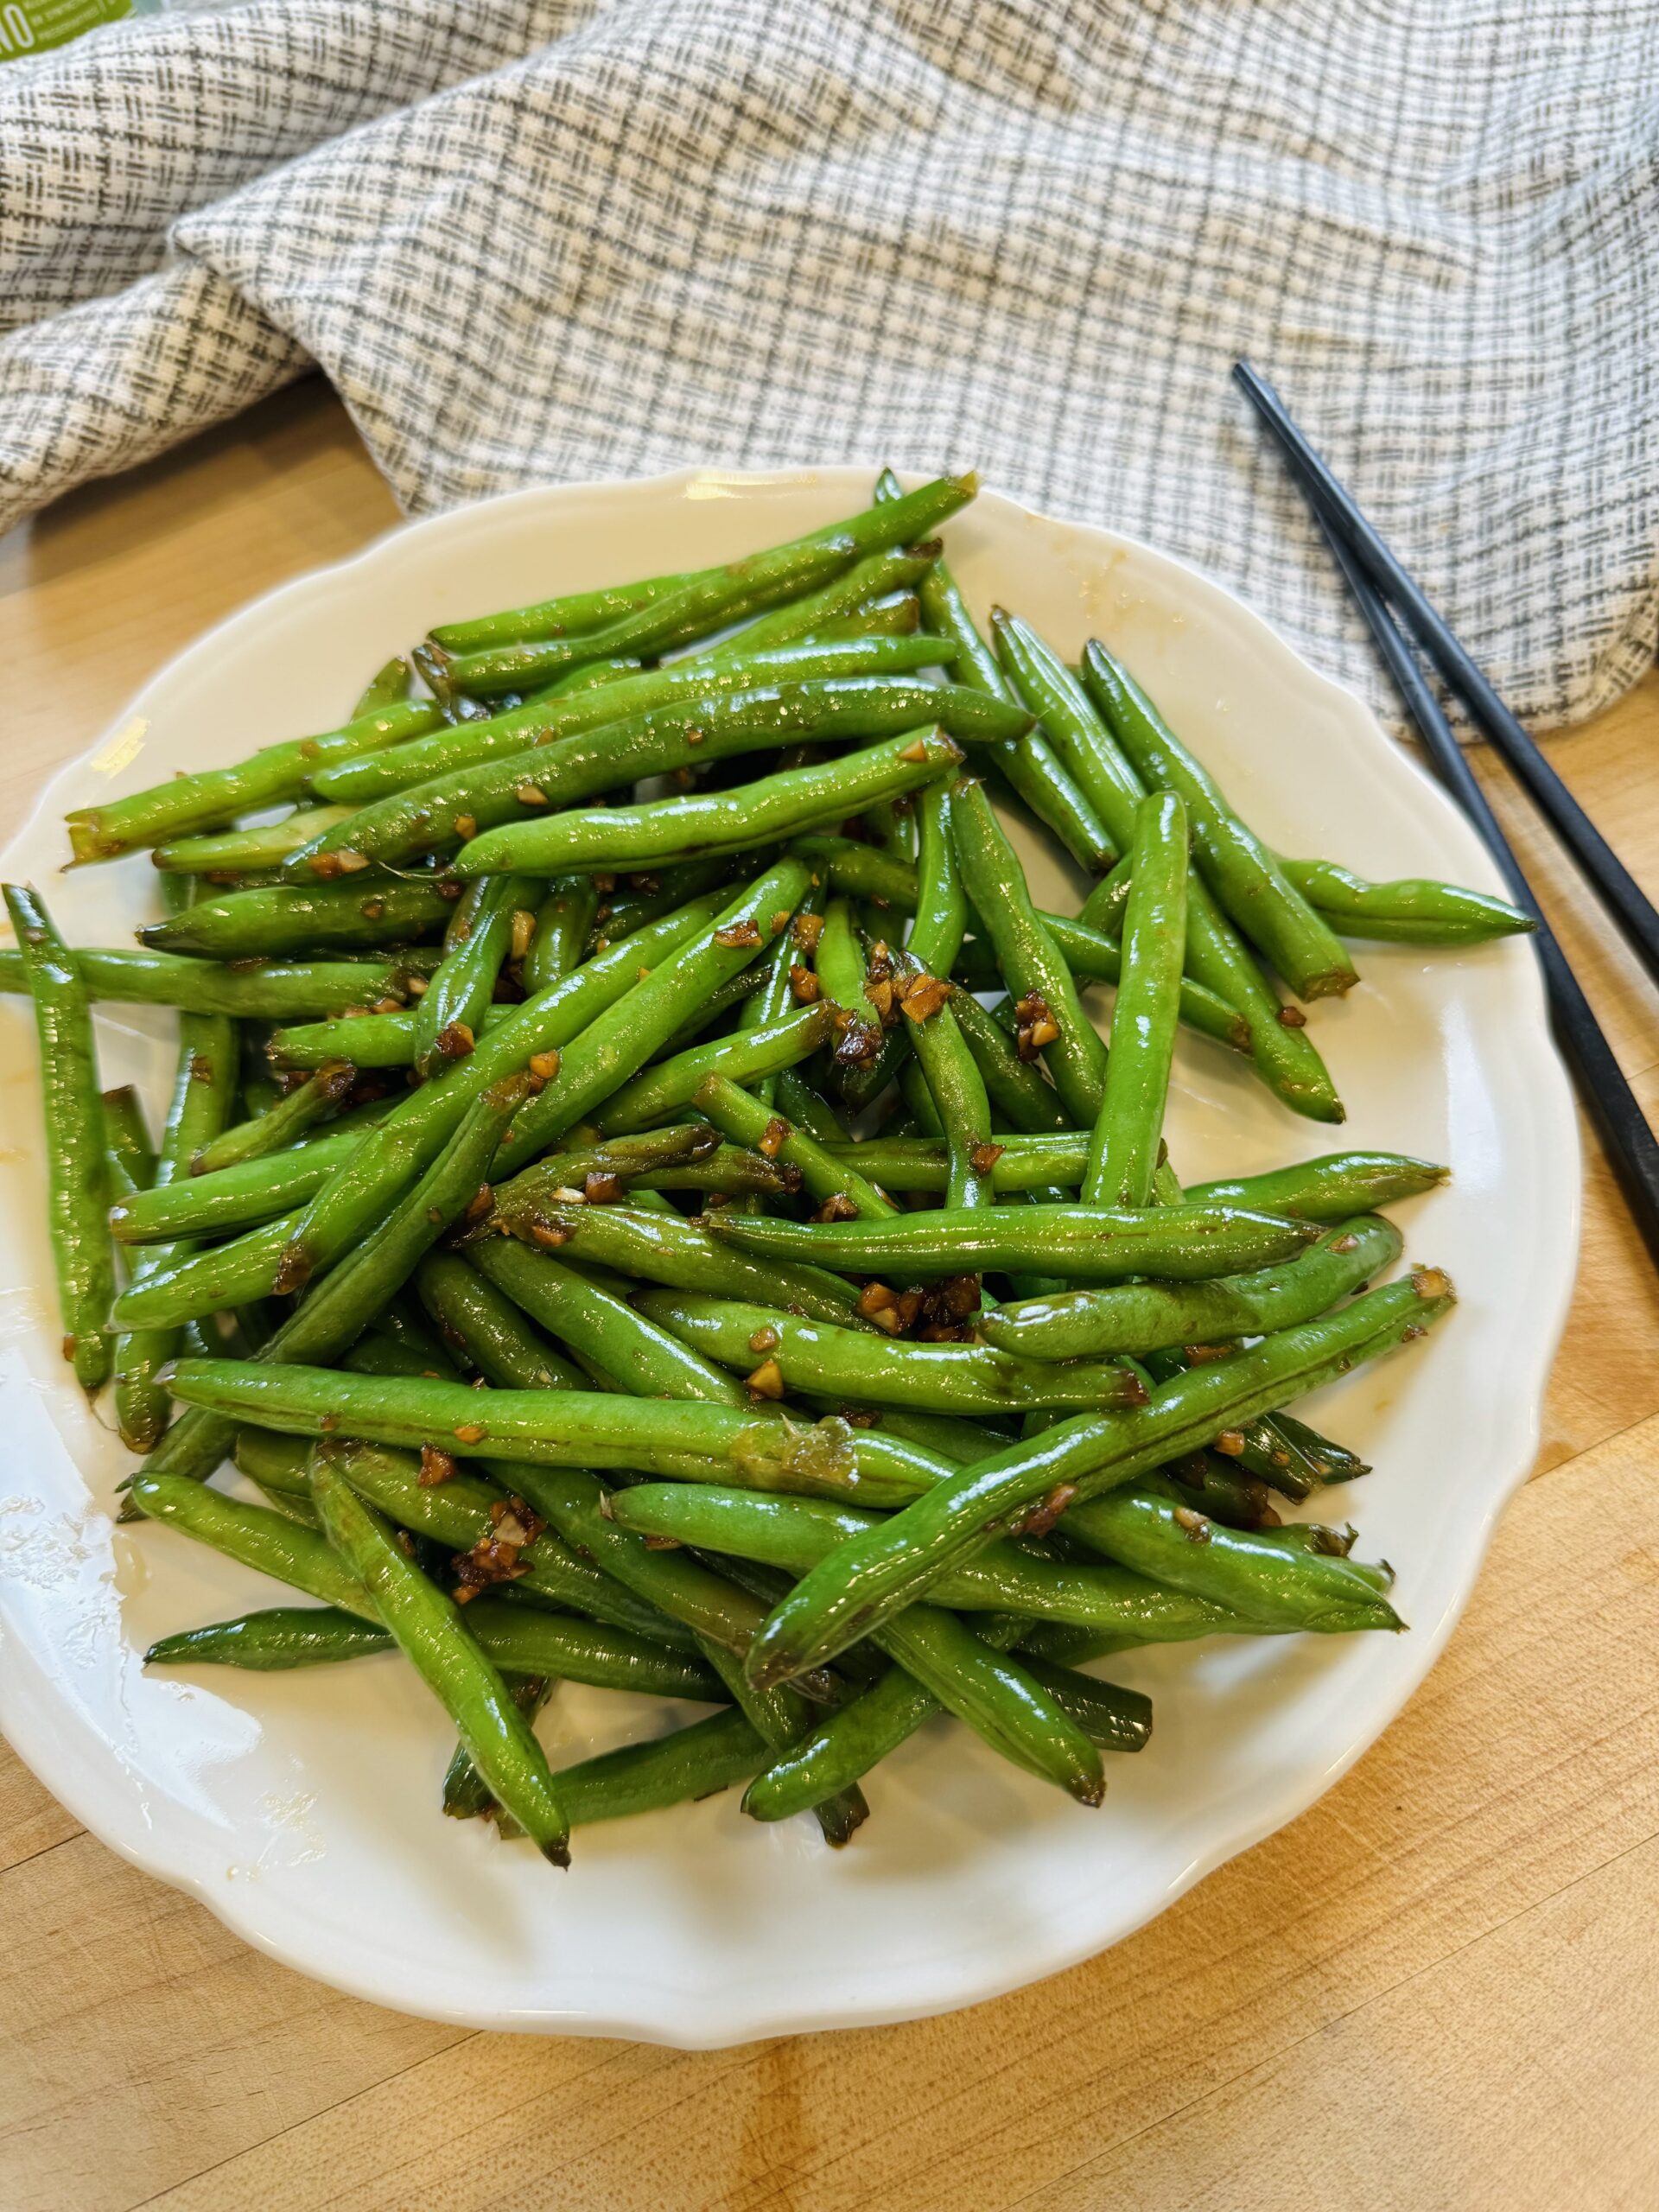 garlic green beans served on a dish with chopsticks on the side